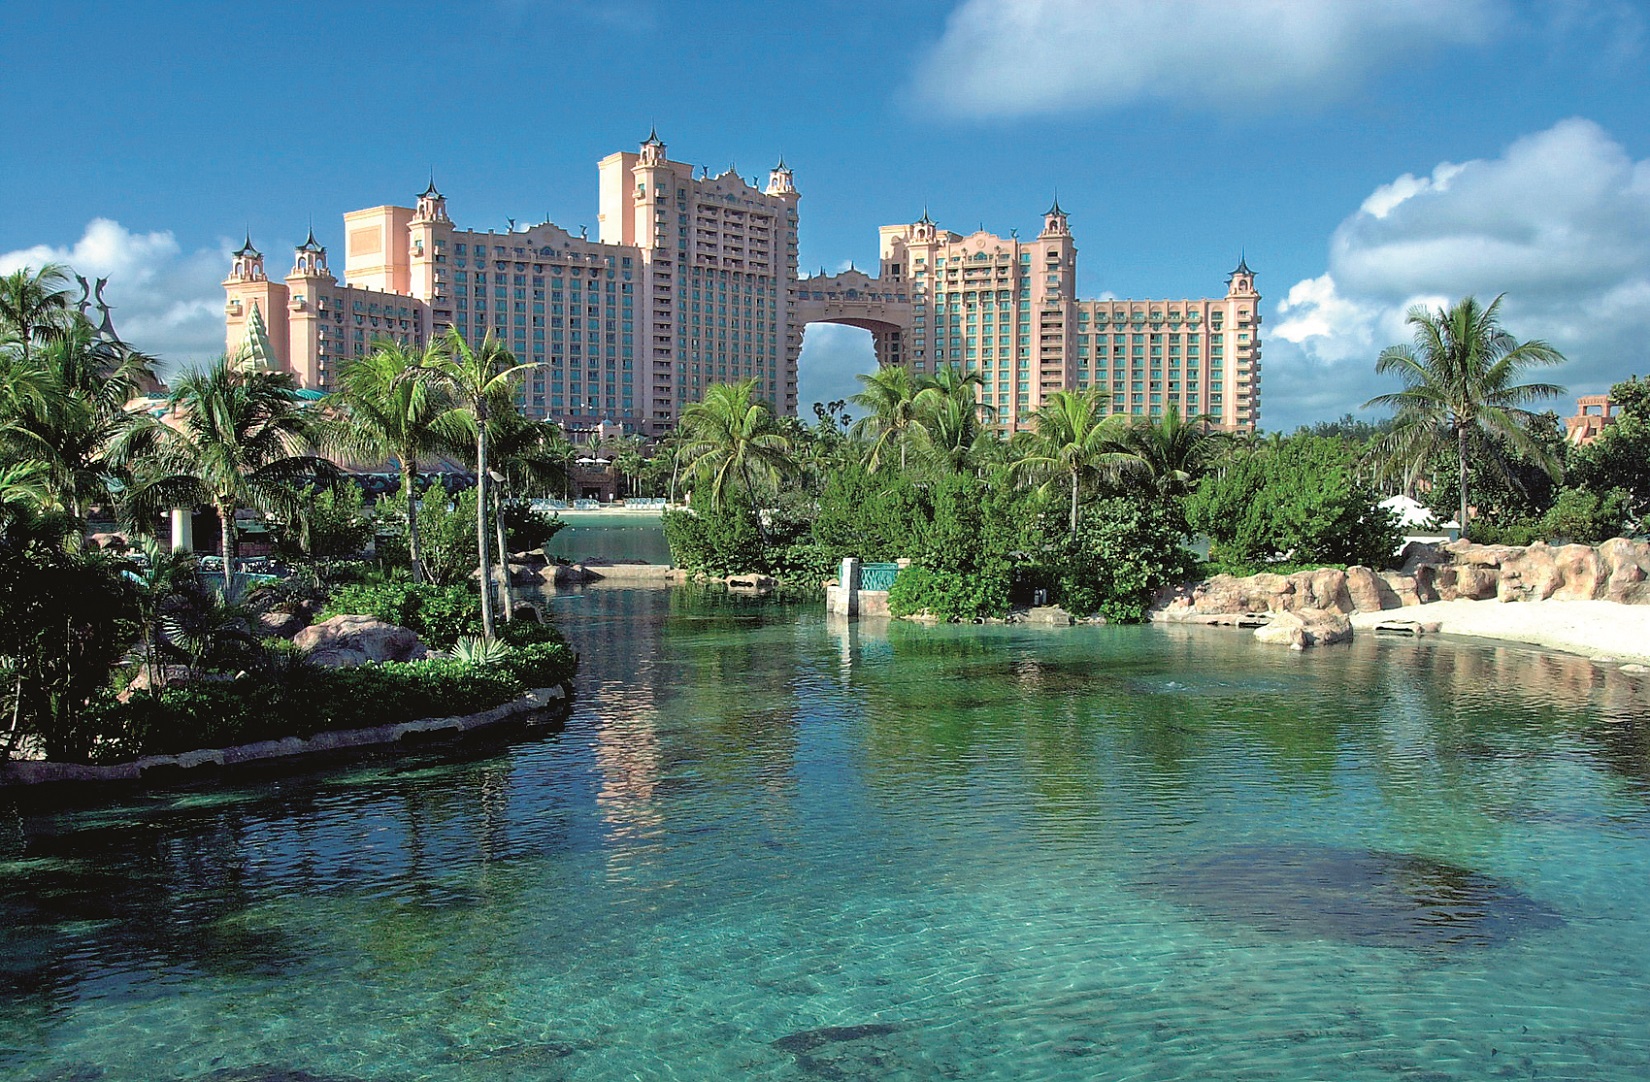 383636 01: The Royal Towers hotel of Atlantis is surrounded by saltwater lagoons full of fish that can be seen from underground as well as from above December 11, 2000 on Paradise Island in Nassau, Bahamas. (Photo by Tim Chapman/Liaison)